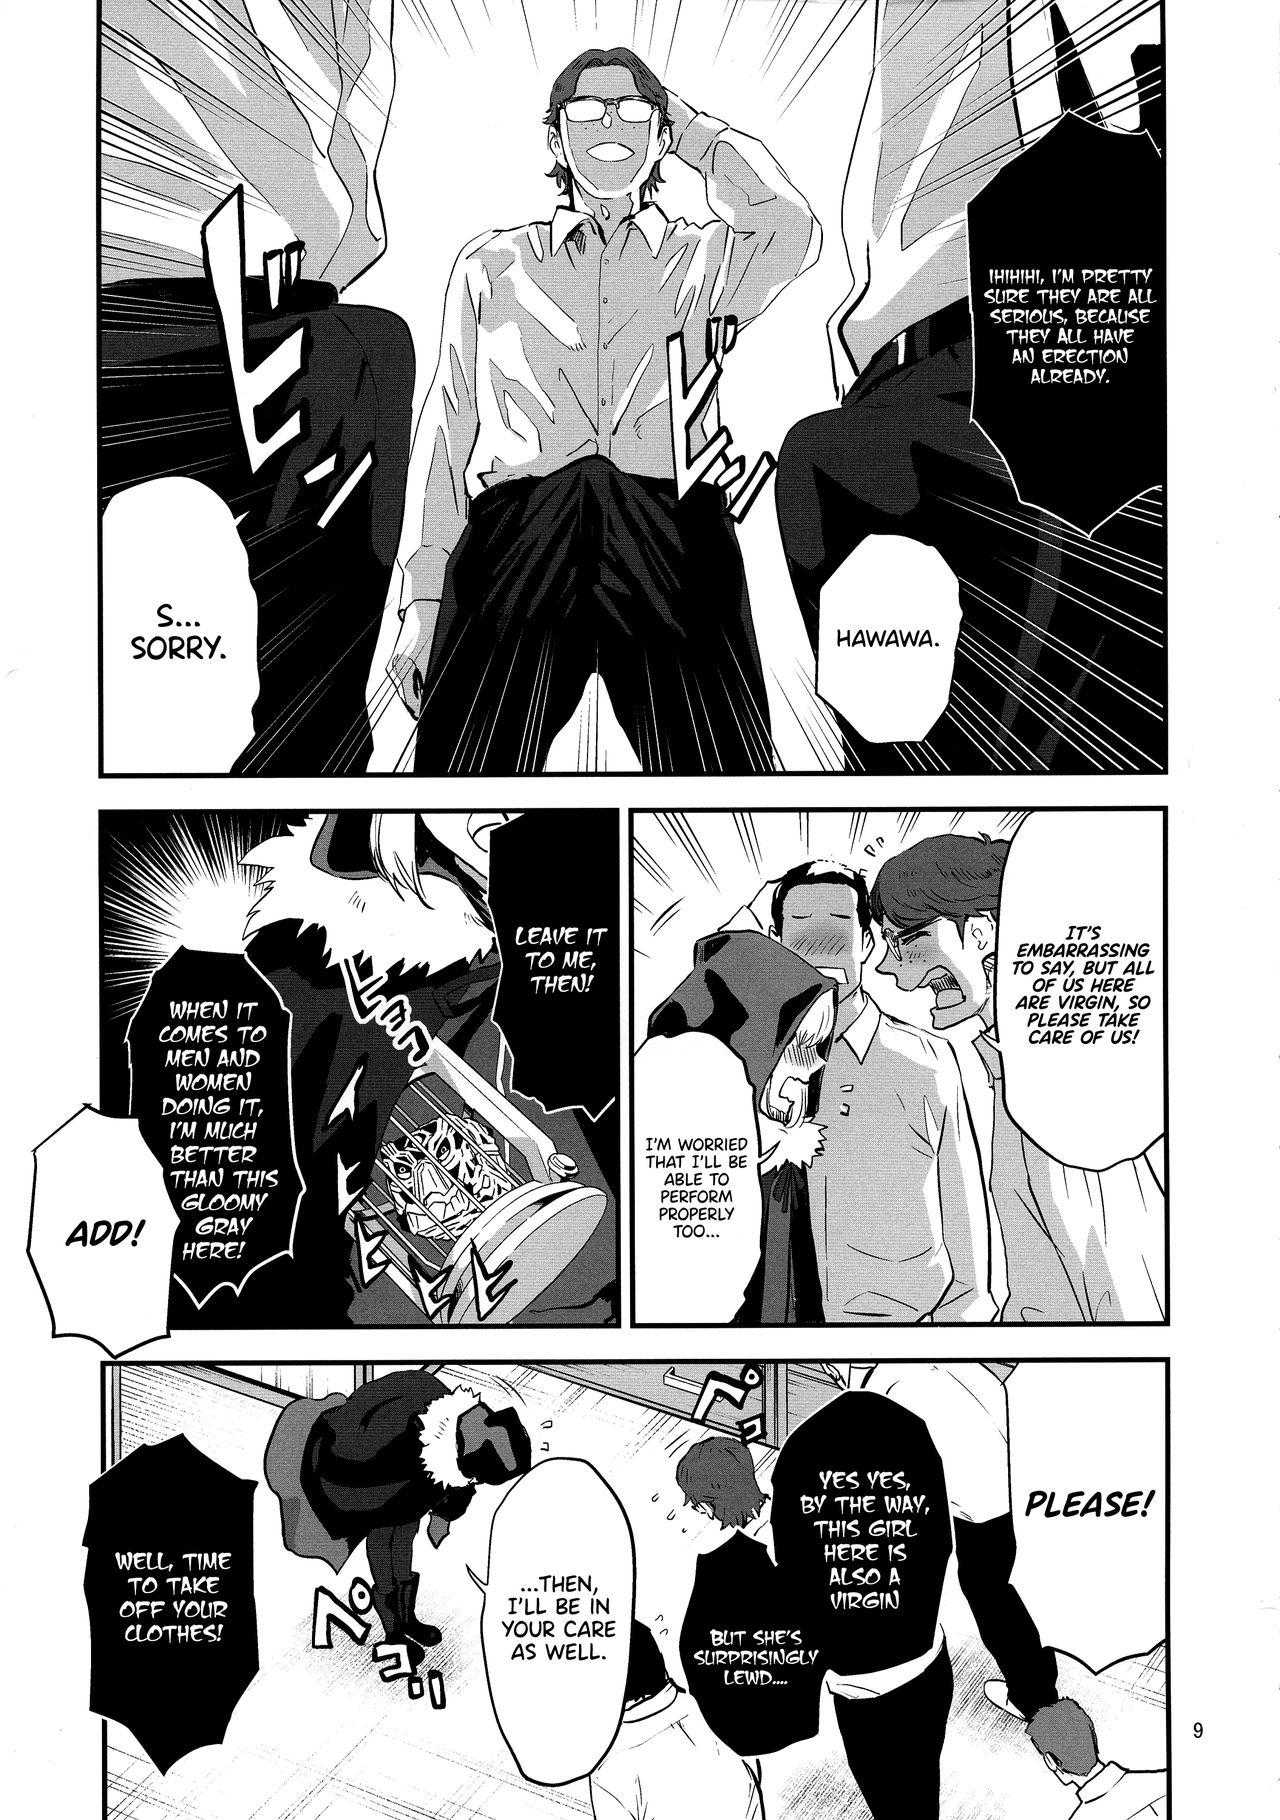 Flash Taking Advantage of Gray-chan Weakness, We Graduated from our Virginity. - Lord el-melloi ii sei no jikenbo Teen Blowjob - Page 9